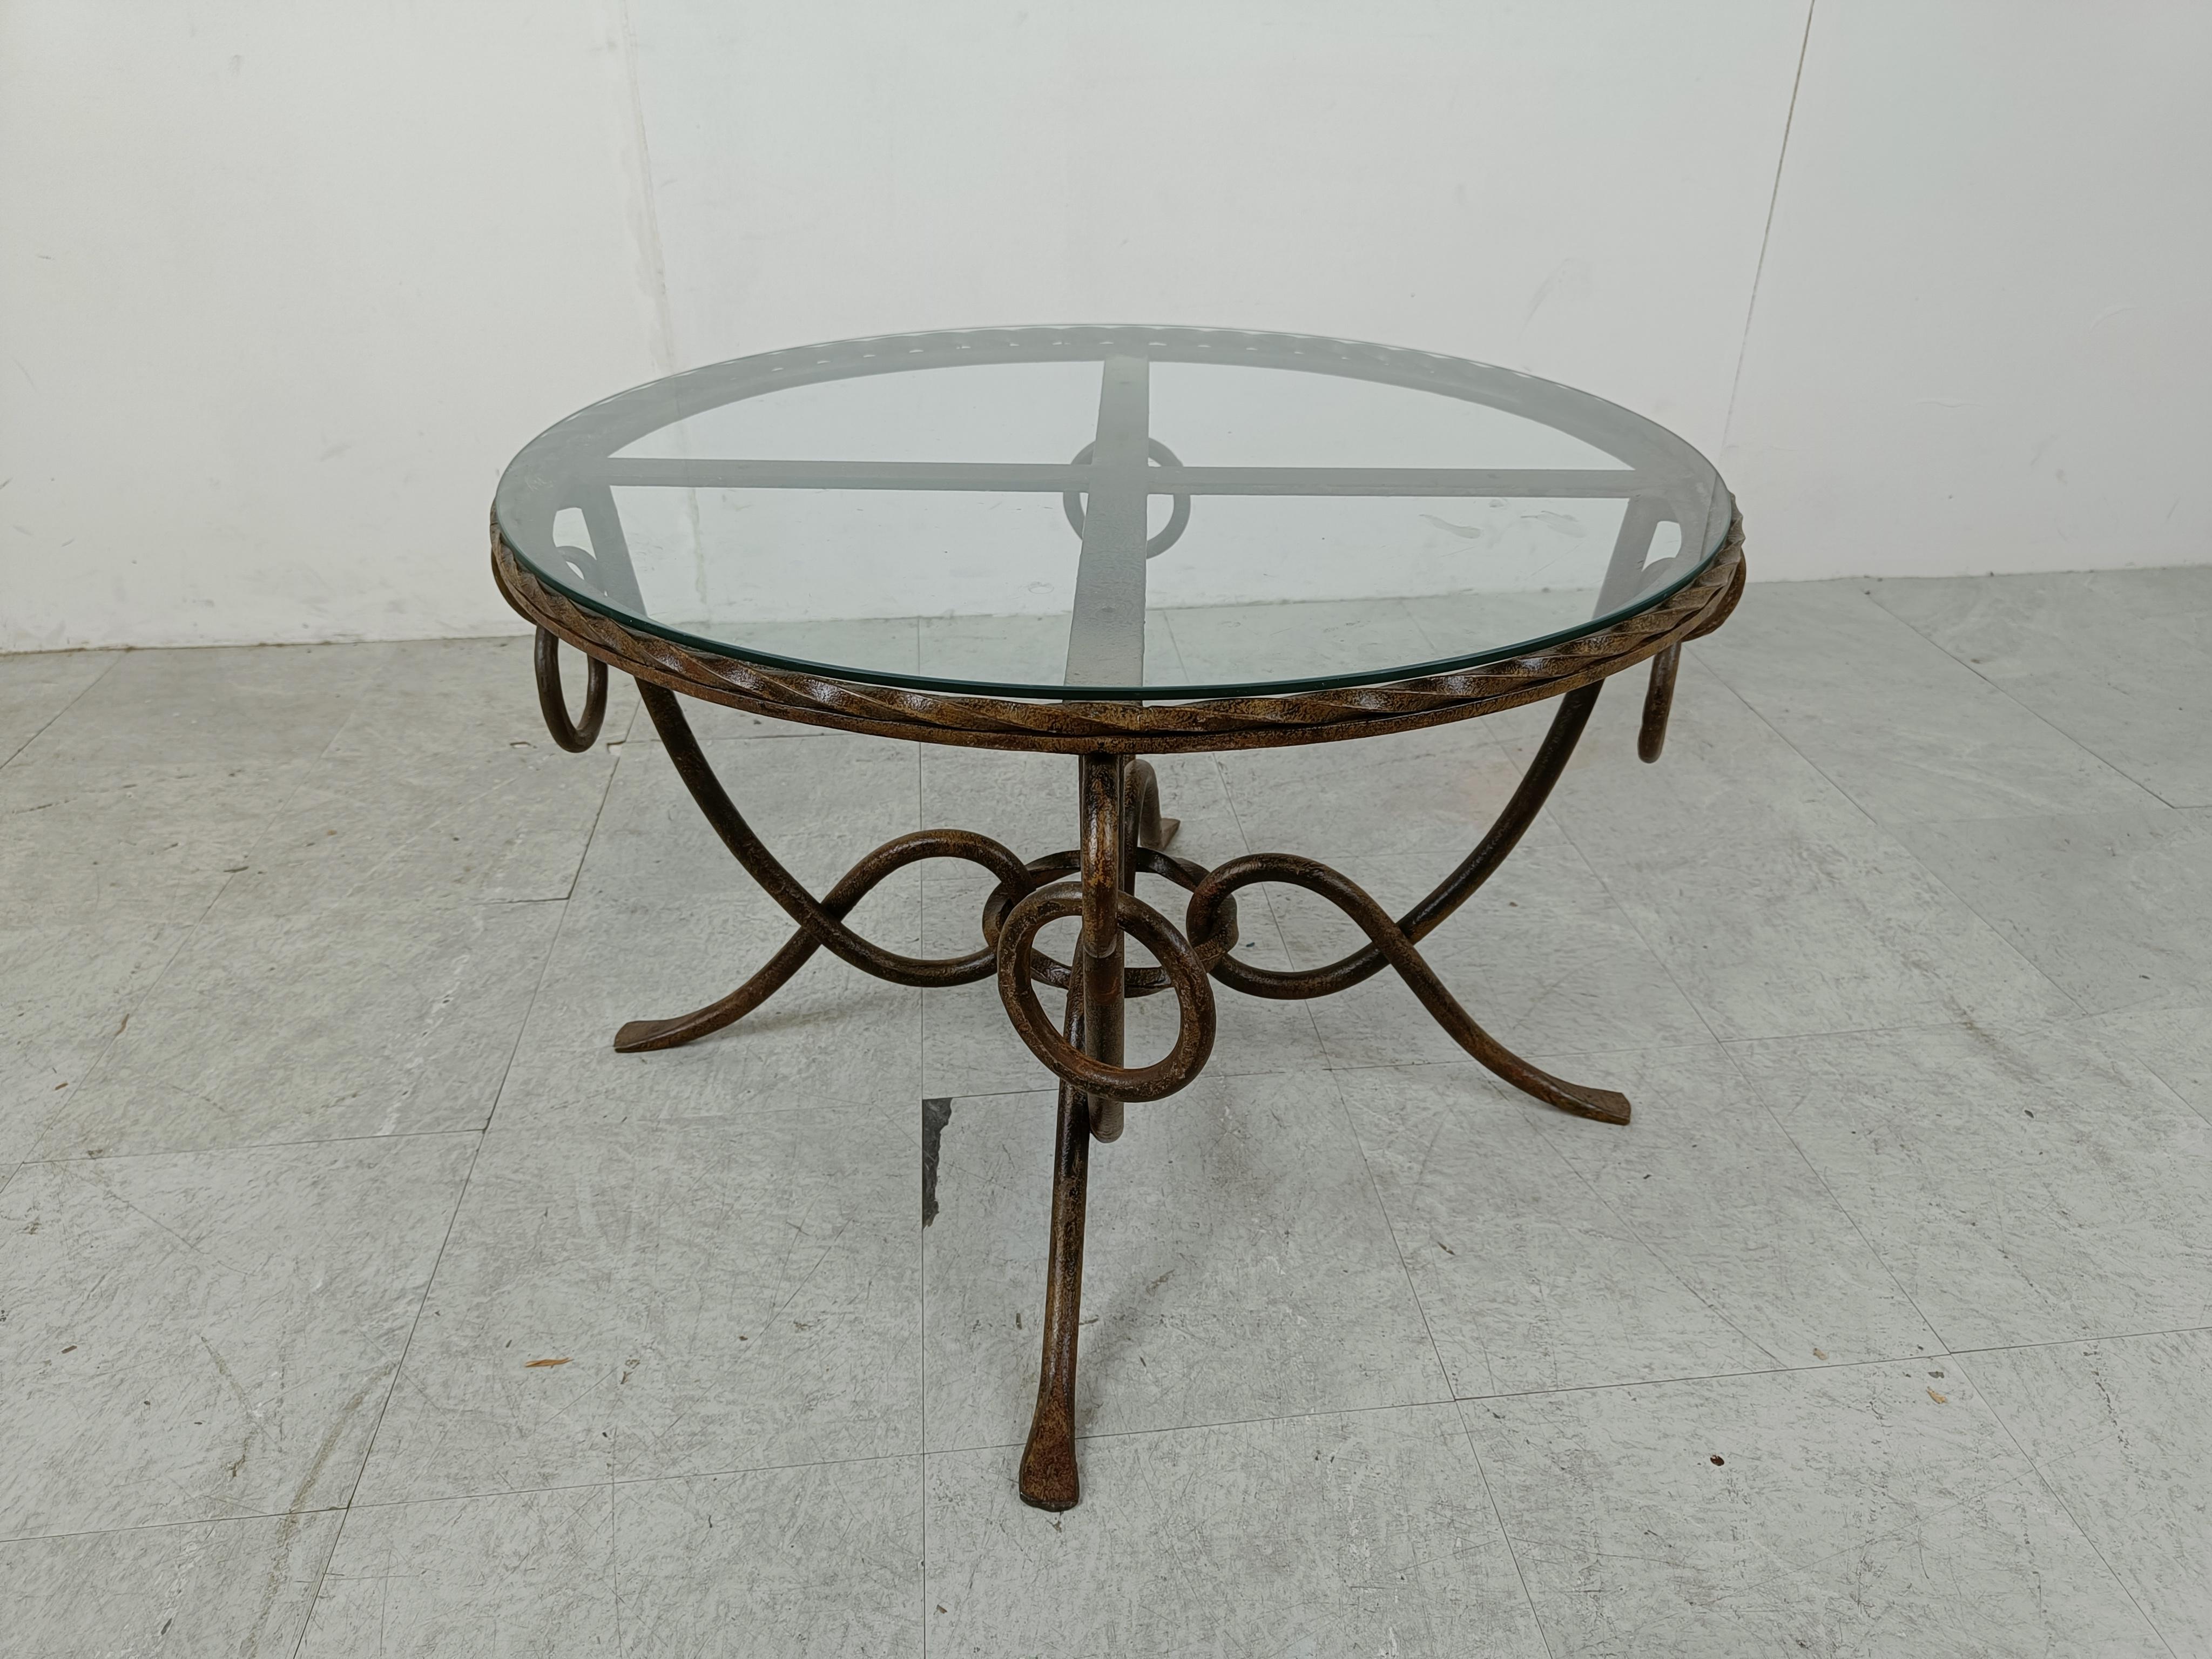 Vintage coffee table designed by René Drouet (1899–1993).

The table has a gilded wrought iron base and a glass top.

Great craftsmanship.

1940s - France

Dimensions:
Height: 47cm/18.50